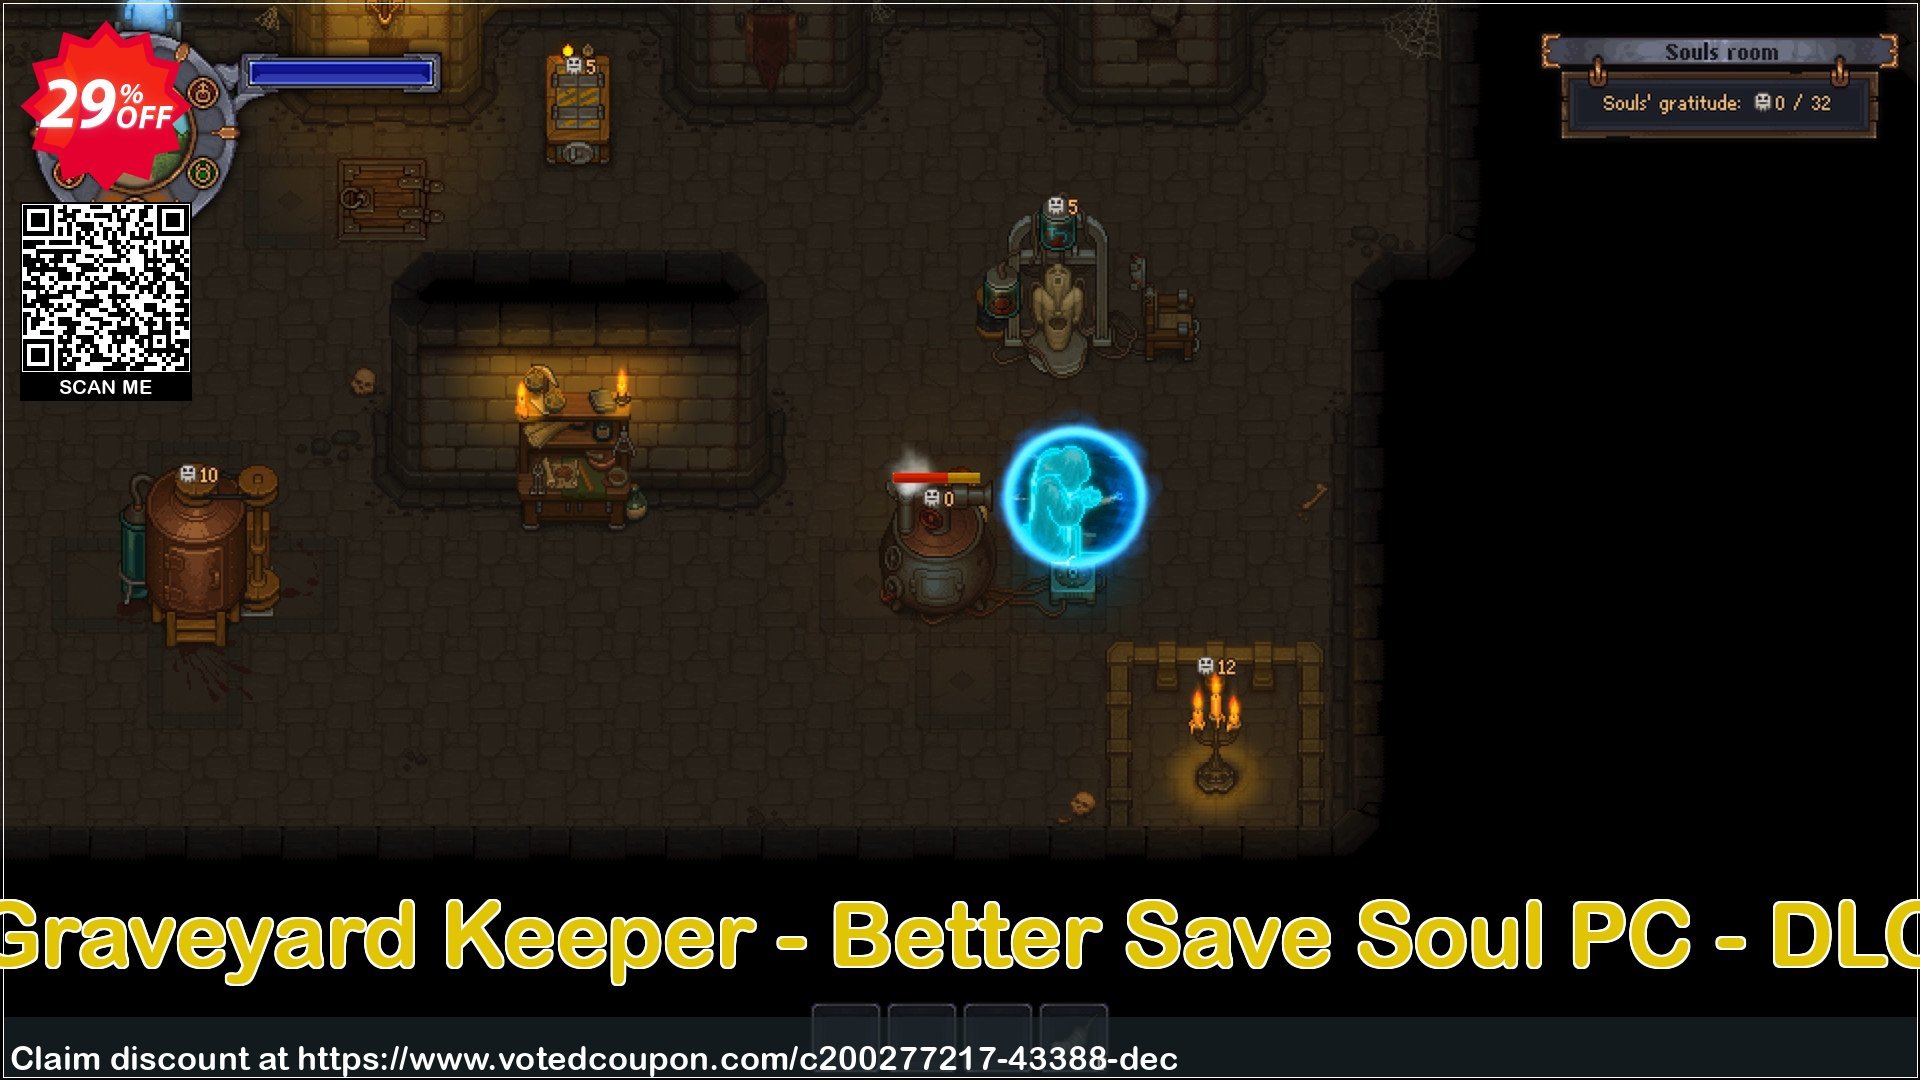 Graveyard Keeper - Better Save Soul PC - DLC Coupon Code May 2024, 29% OFF - VotedCoupon